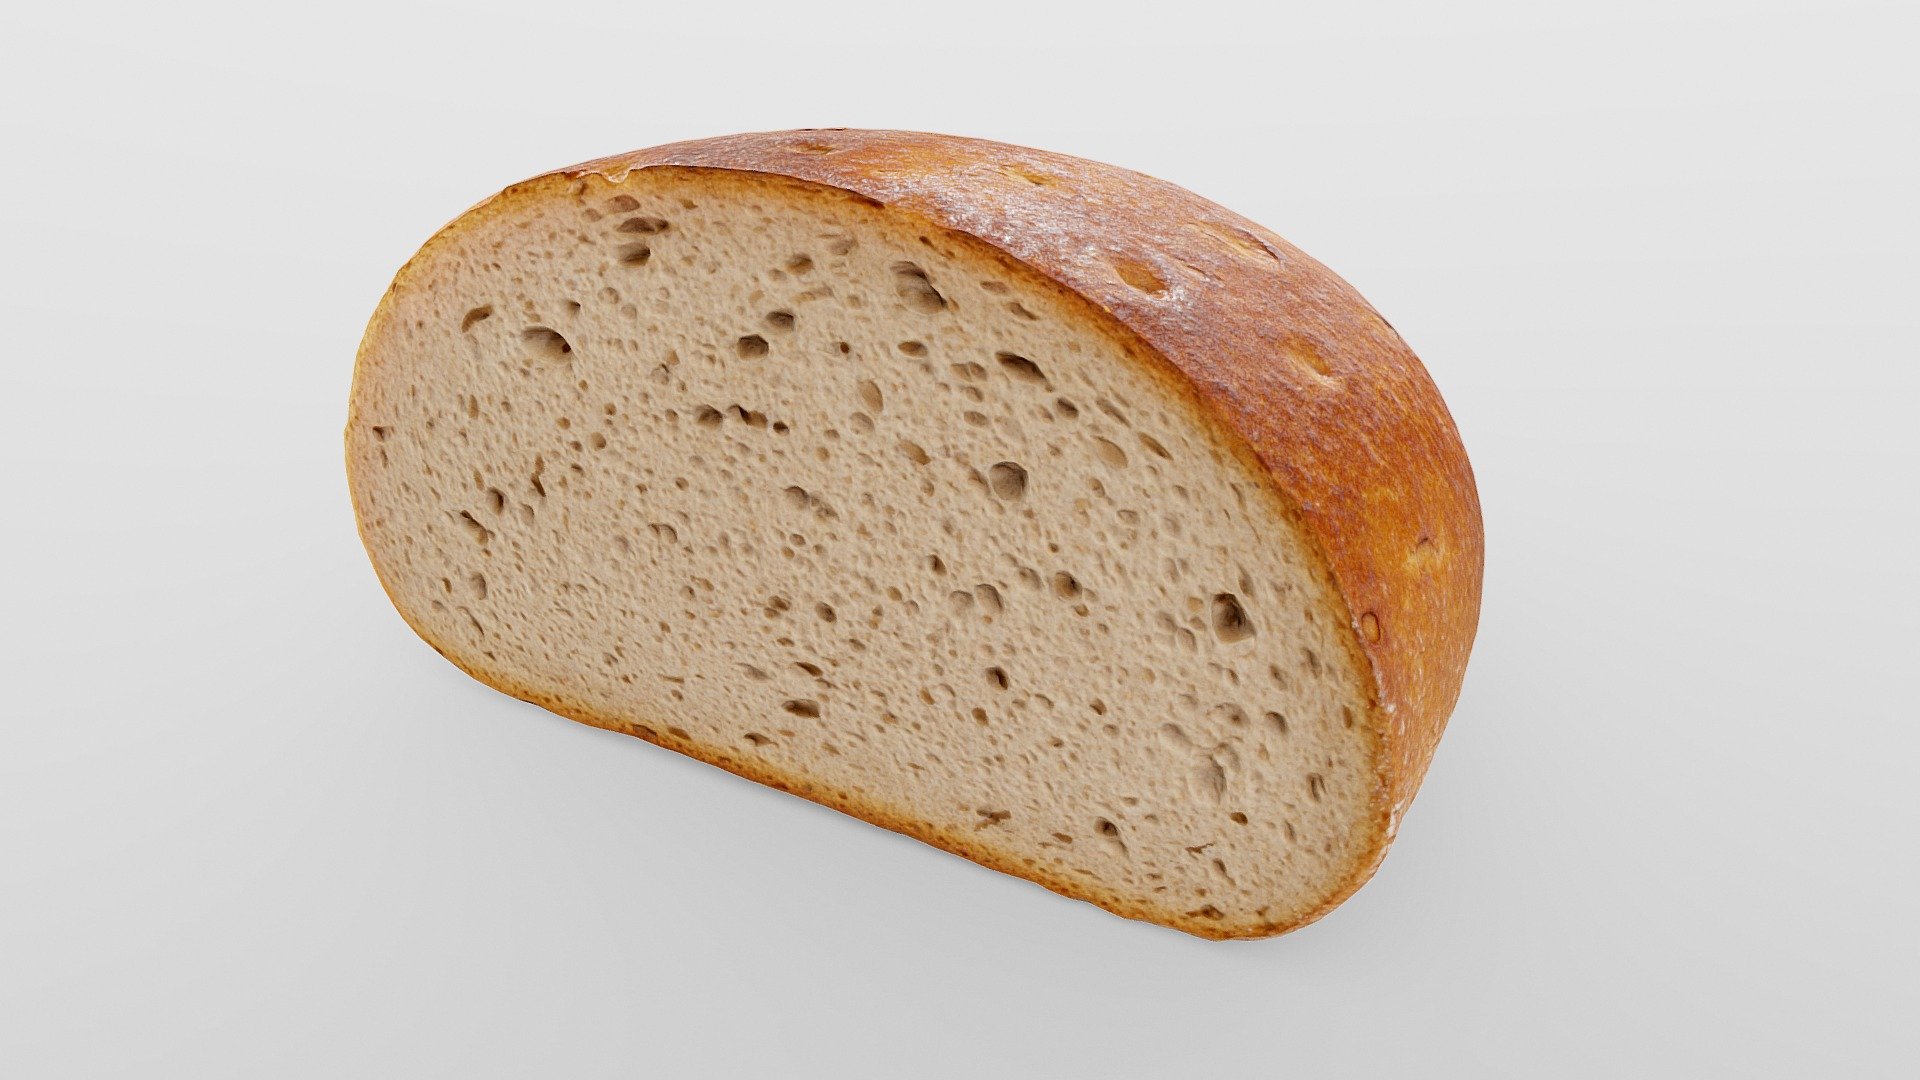 A German bread loaf cut in half

10.1 x 16.0 x 9.2 cm

The highly optimized, photorealistic model was created using custom photogrammetry techniques. This involves capturing hundreds of pictures from many angles and under different lighting conditions. The resulting data is then processed with manual and automated pipelines, by leveraging RawTherapee, Metashape, Blender and self-developed software.

The attached ZIP archive includes the low-poly OBJ mesh, a Blender file and a set of JPEG textures at 4k resolution 3d model